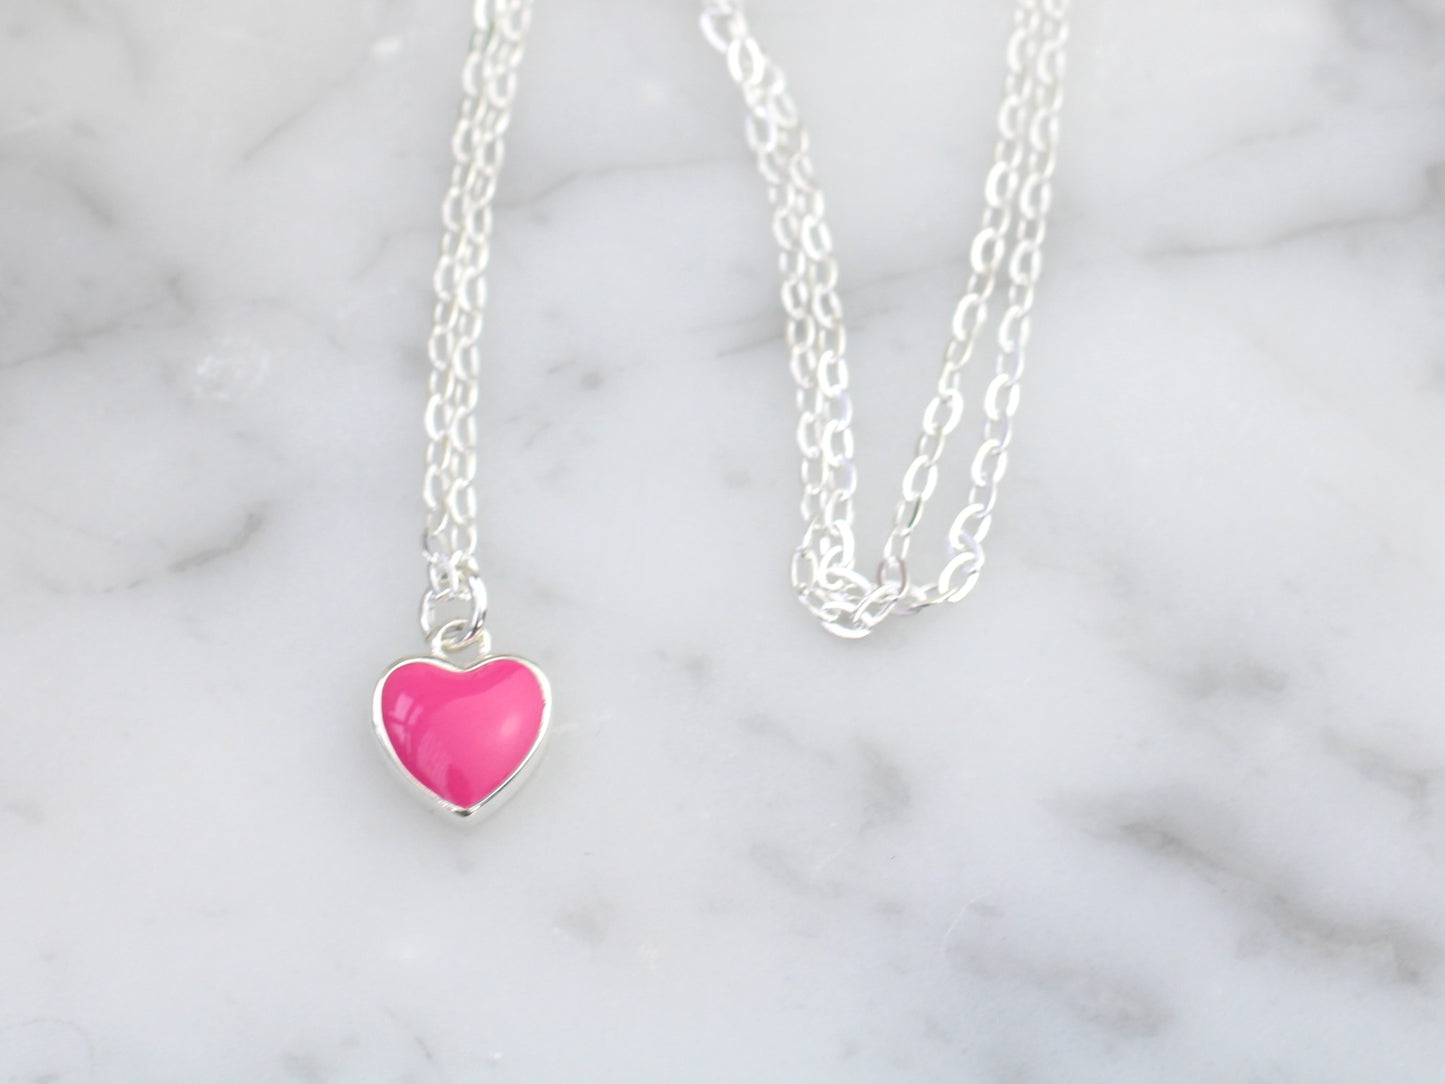 Mothers day necklace. Pink heart necklace.